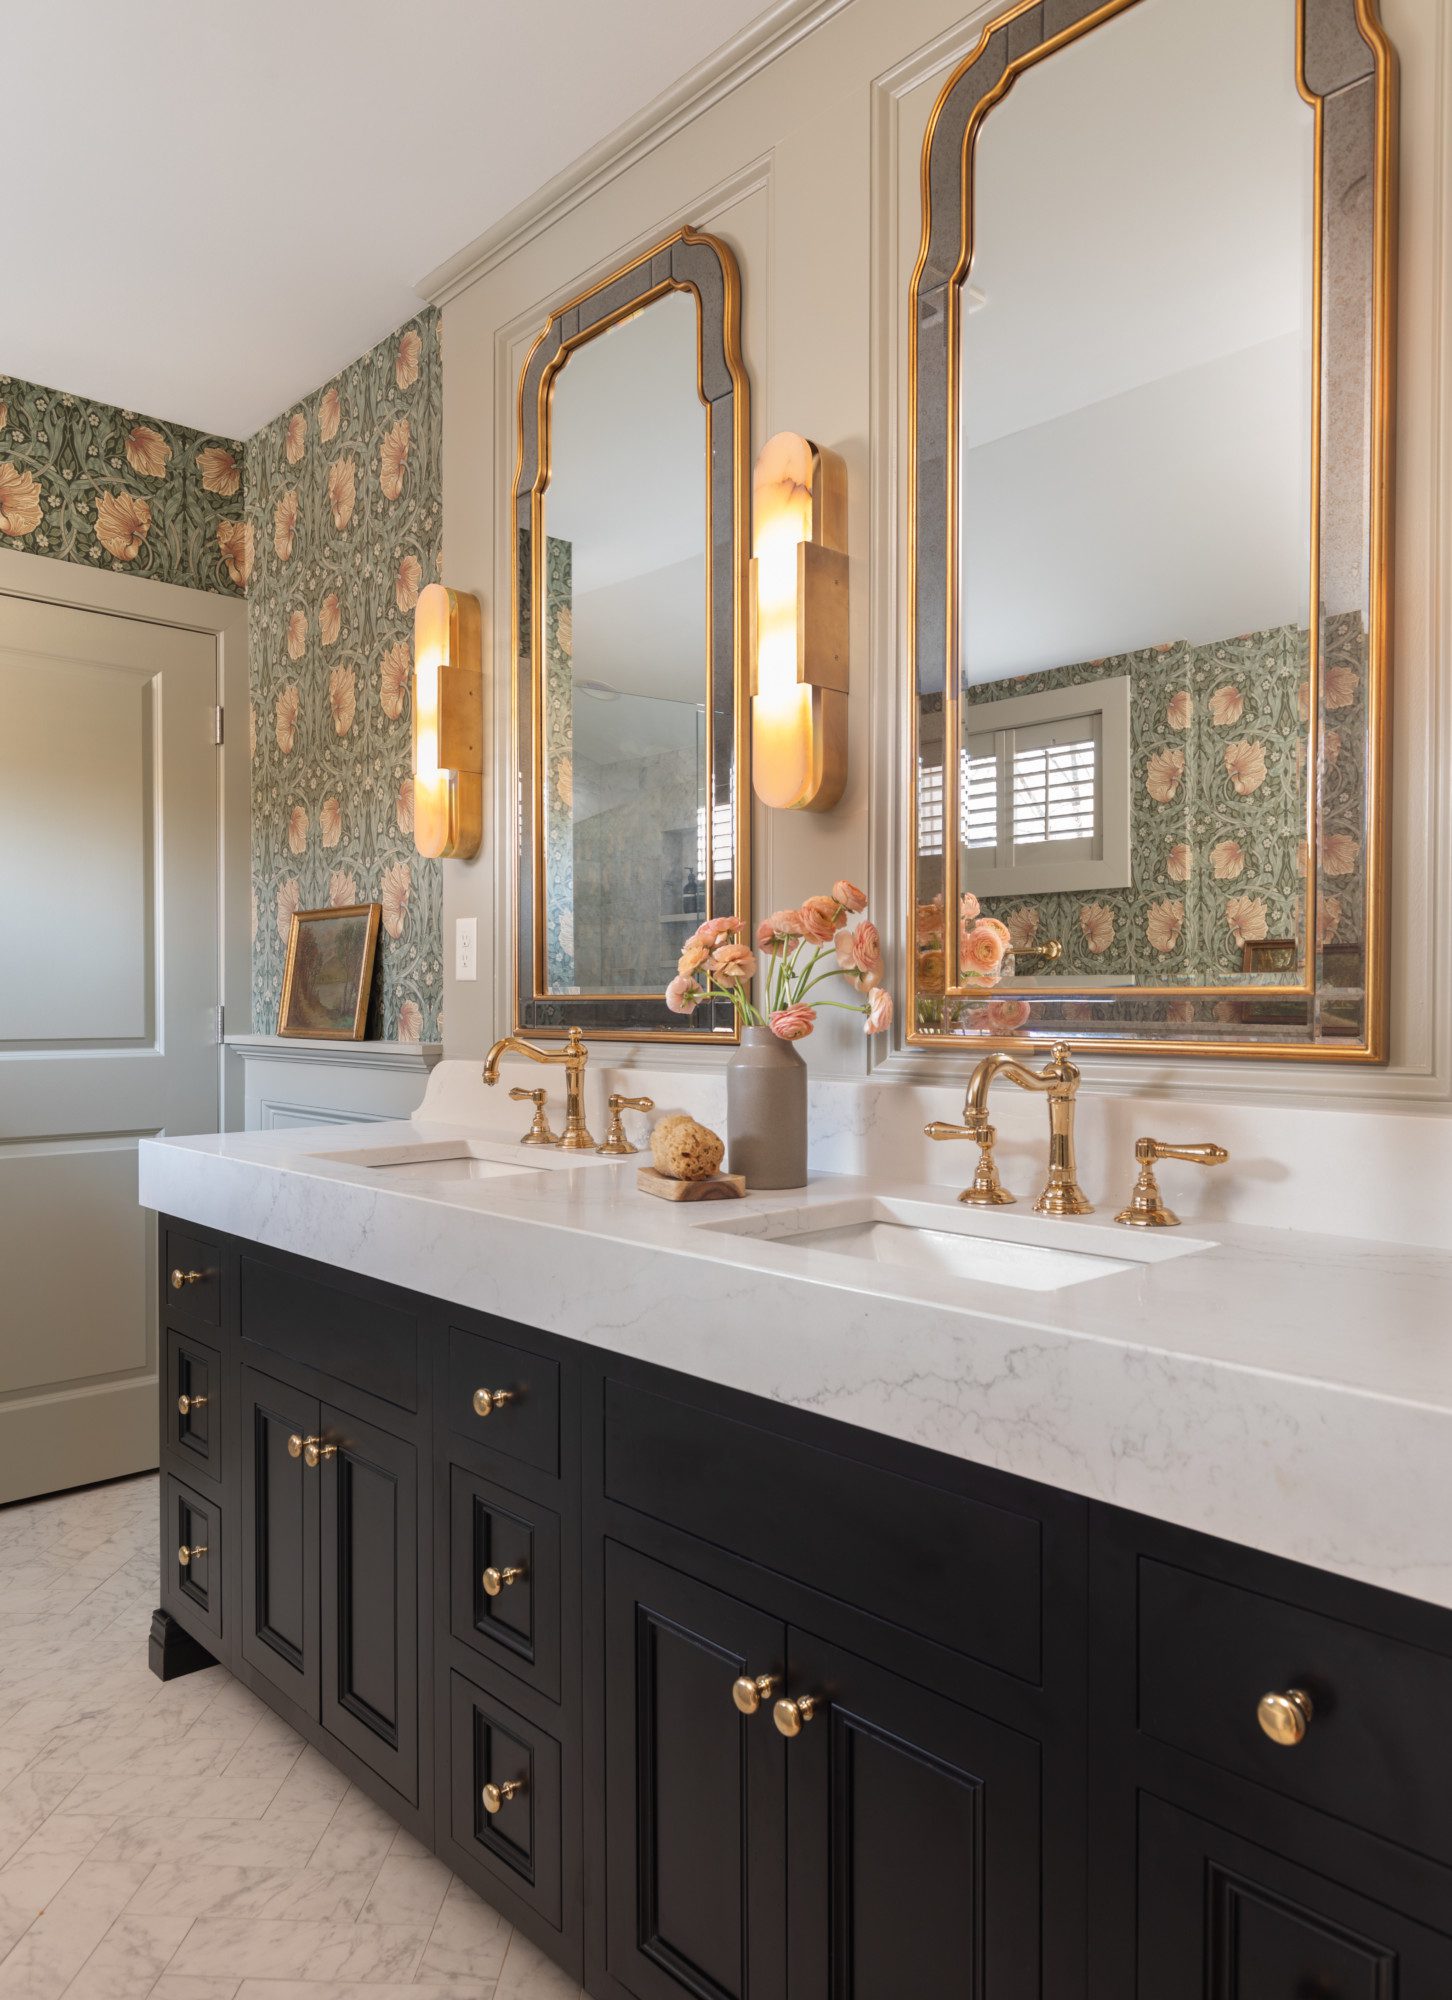 luxurious double vanity with gold accents and dark cabinetry, surrounded with beautiful floral wallpaper